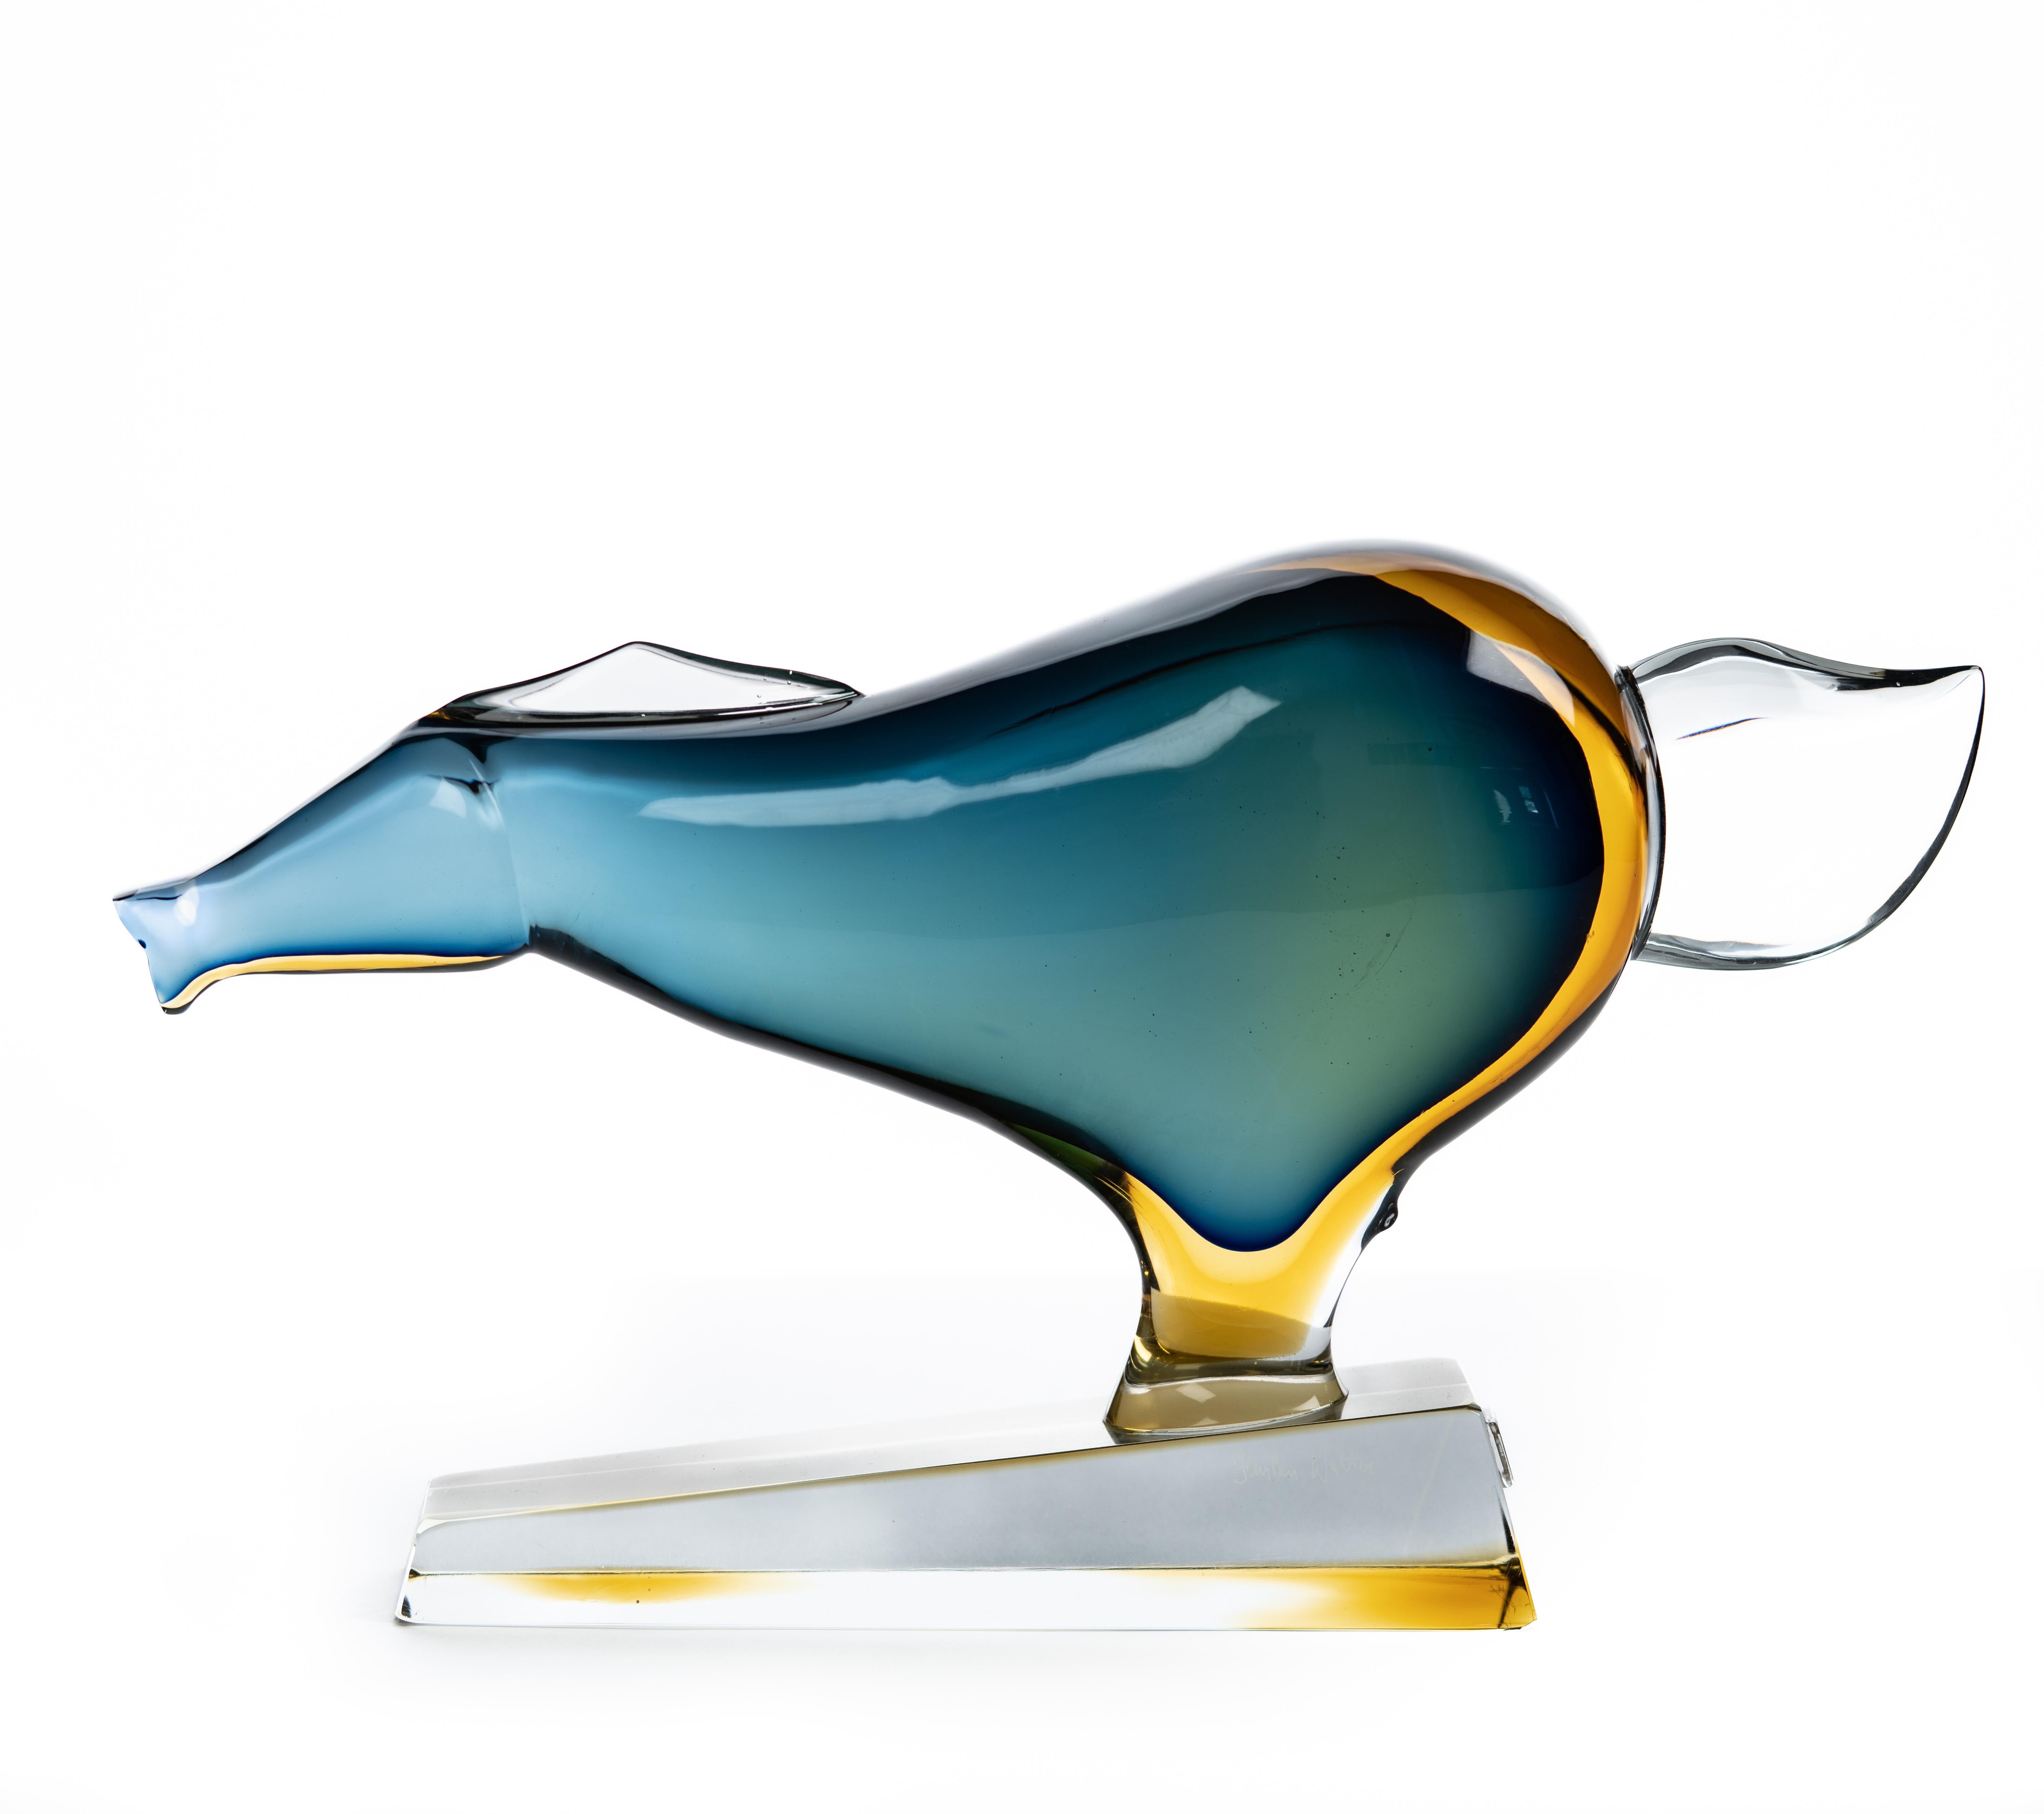 Signed Handblown glass sylized horse, blue, inspired by Picasso. Made by Walter Furlan and measures approx 13